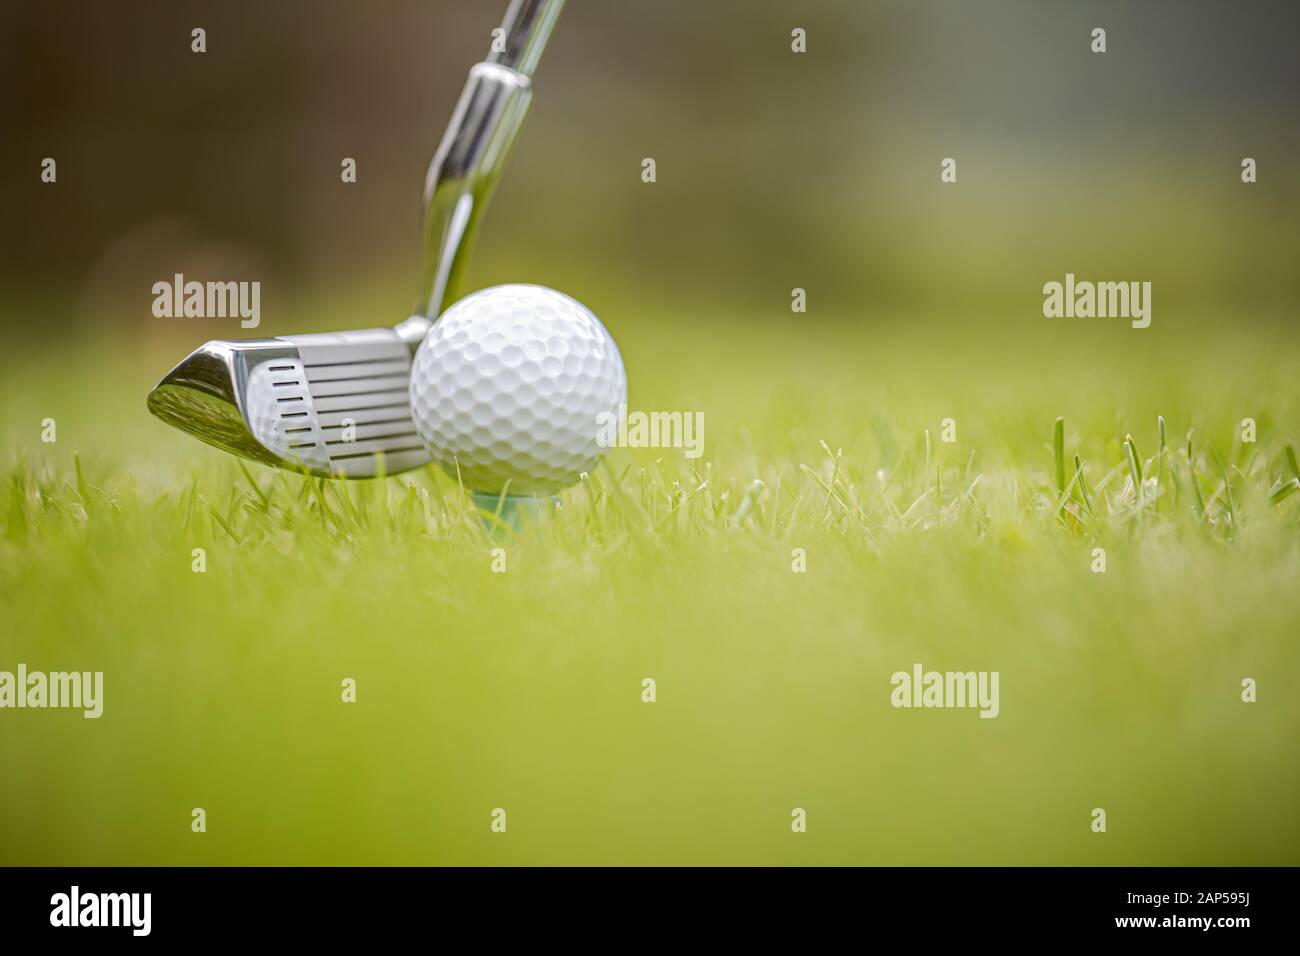 Golf club and ball on tee in front of driver Stock Photo